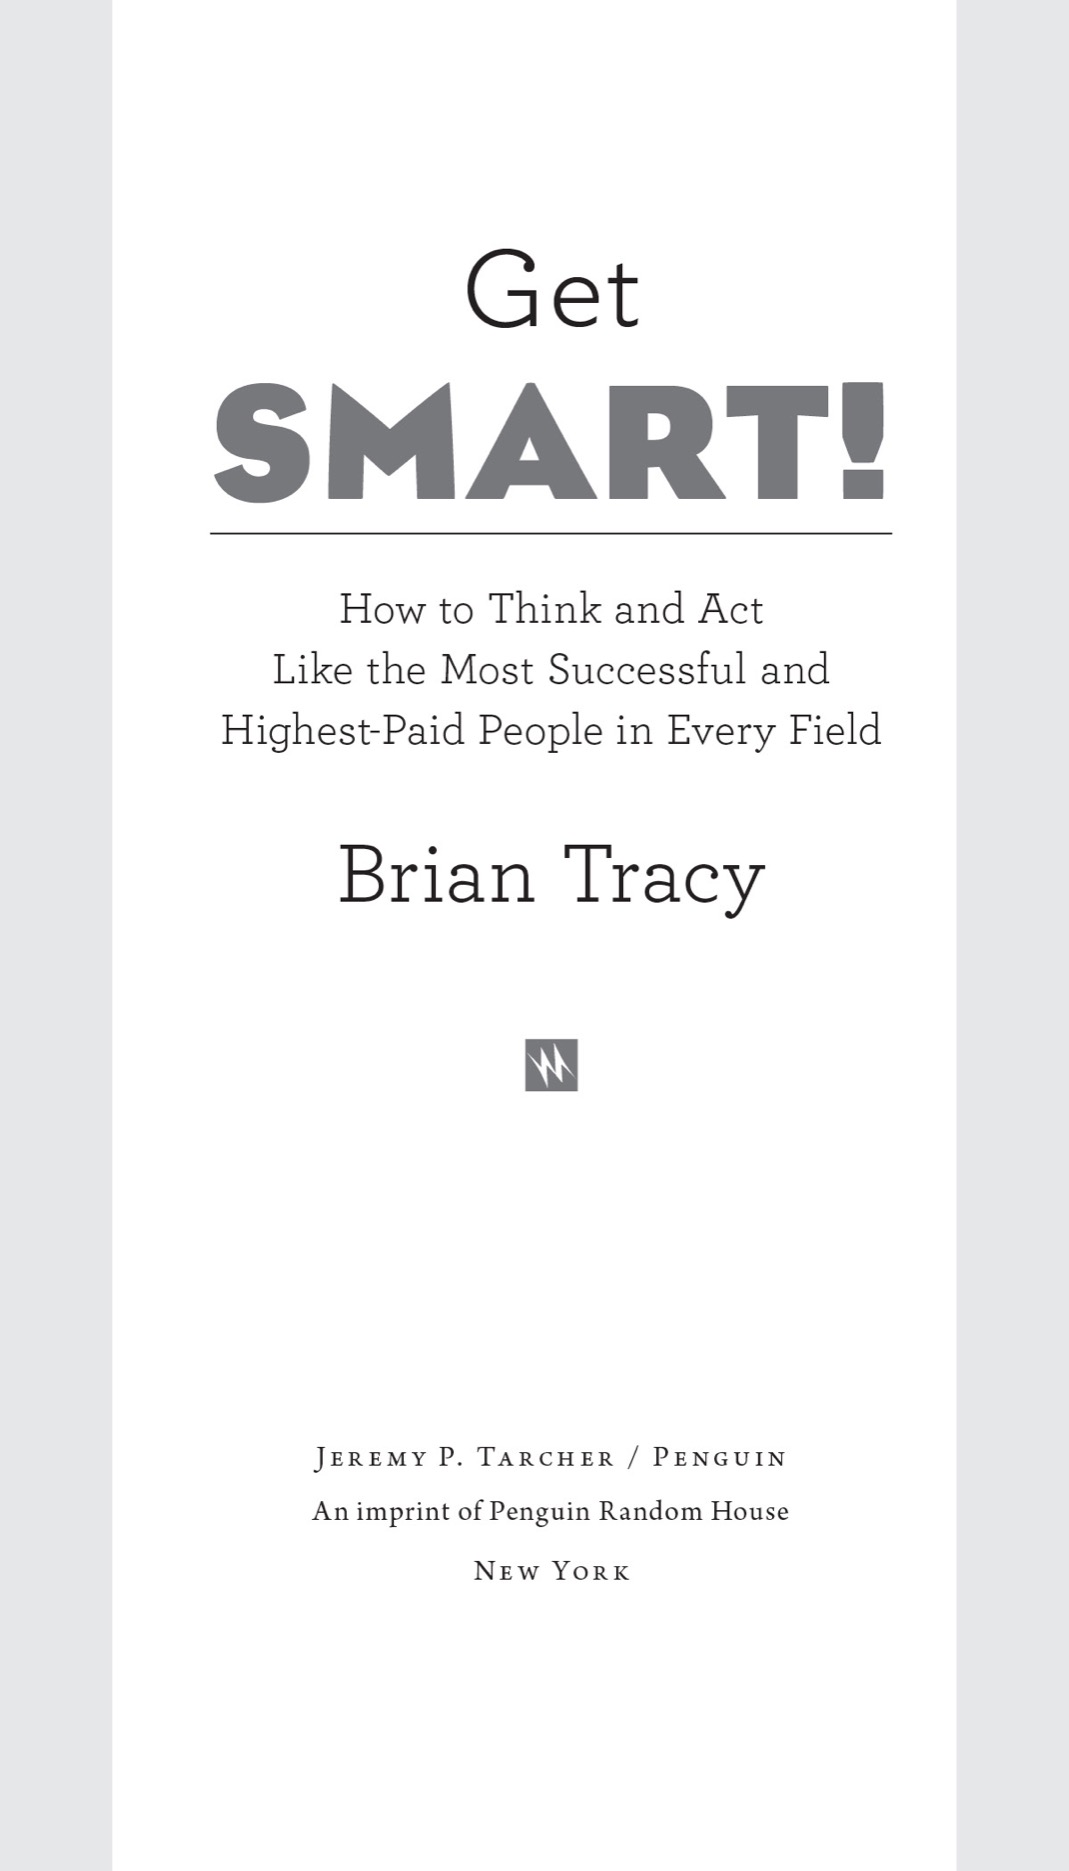 Get Smart How to Think and Act Like the Most Successful and Highest-Paid People in Every Field - image 2